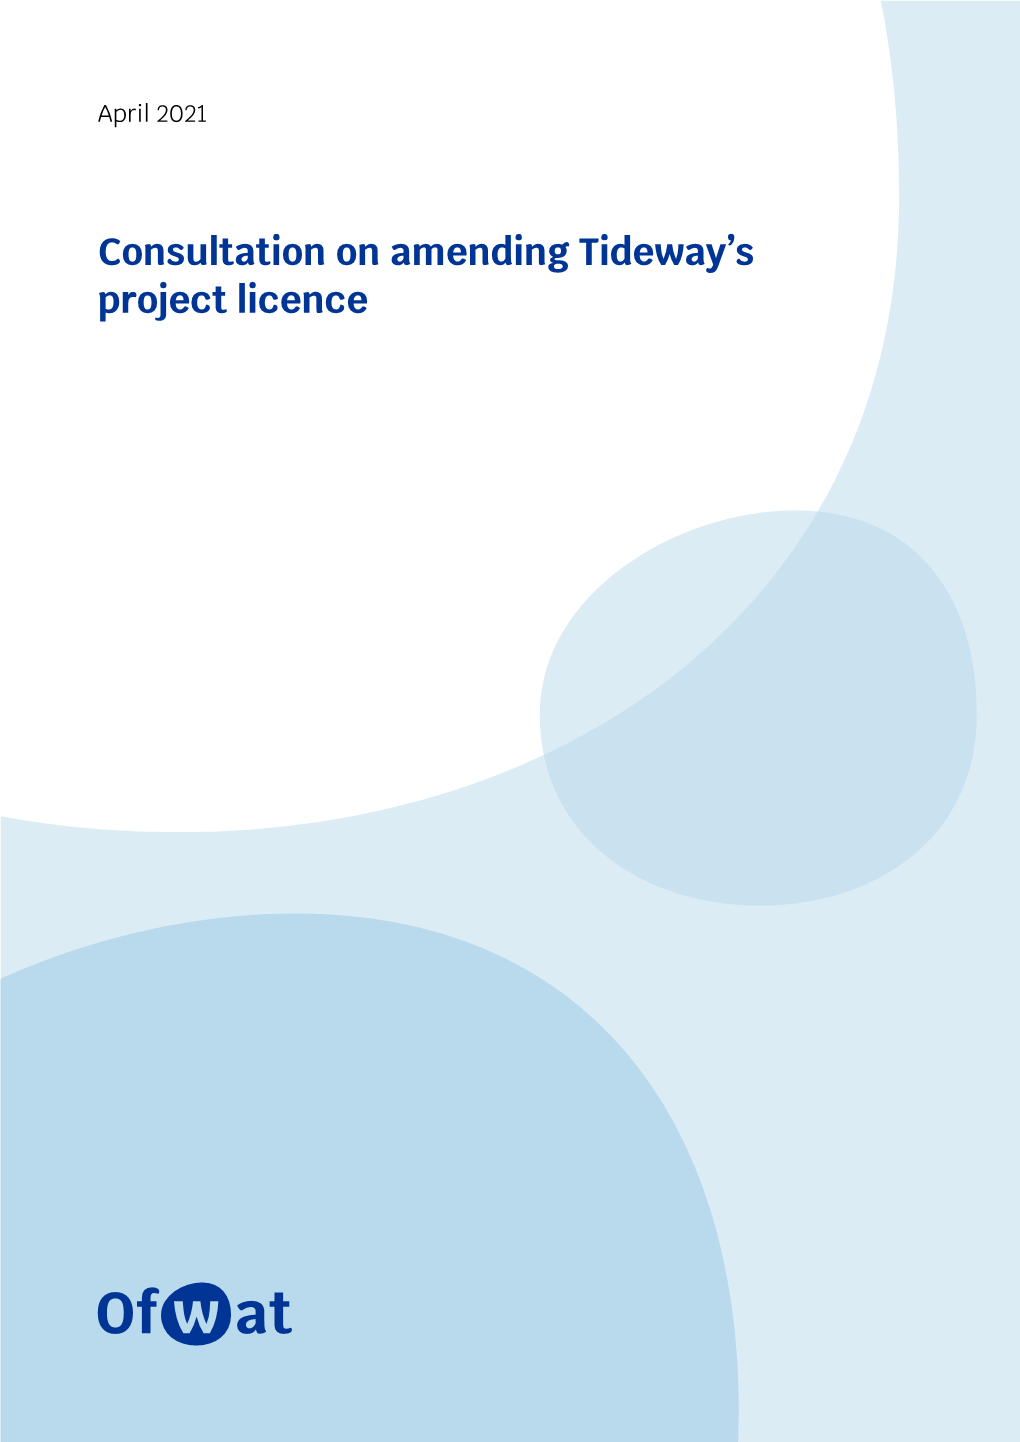 Consultation on Amending Tideway's Project Licence